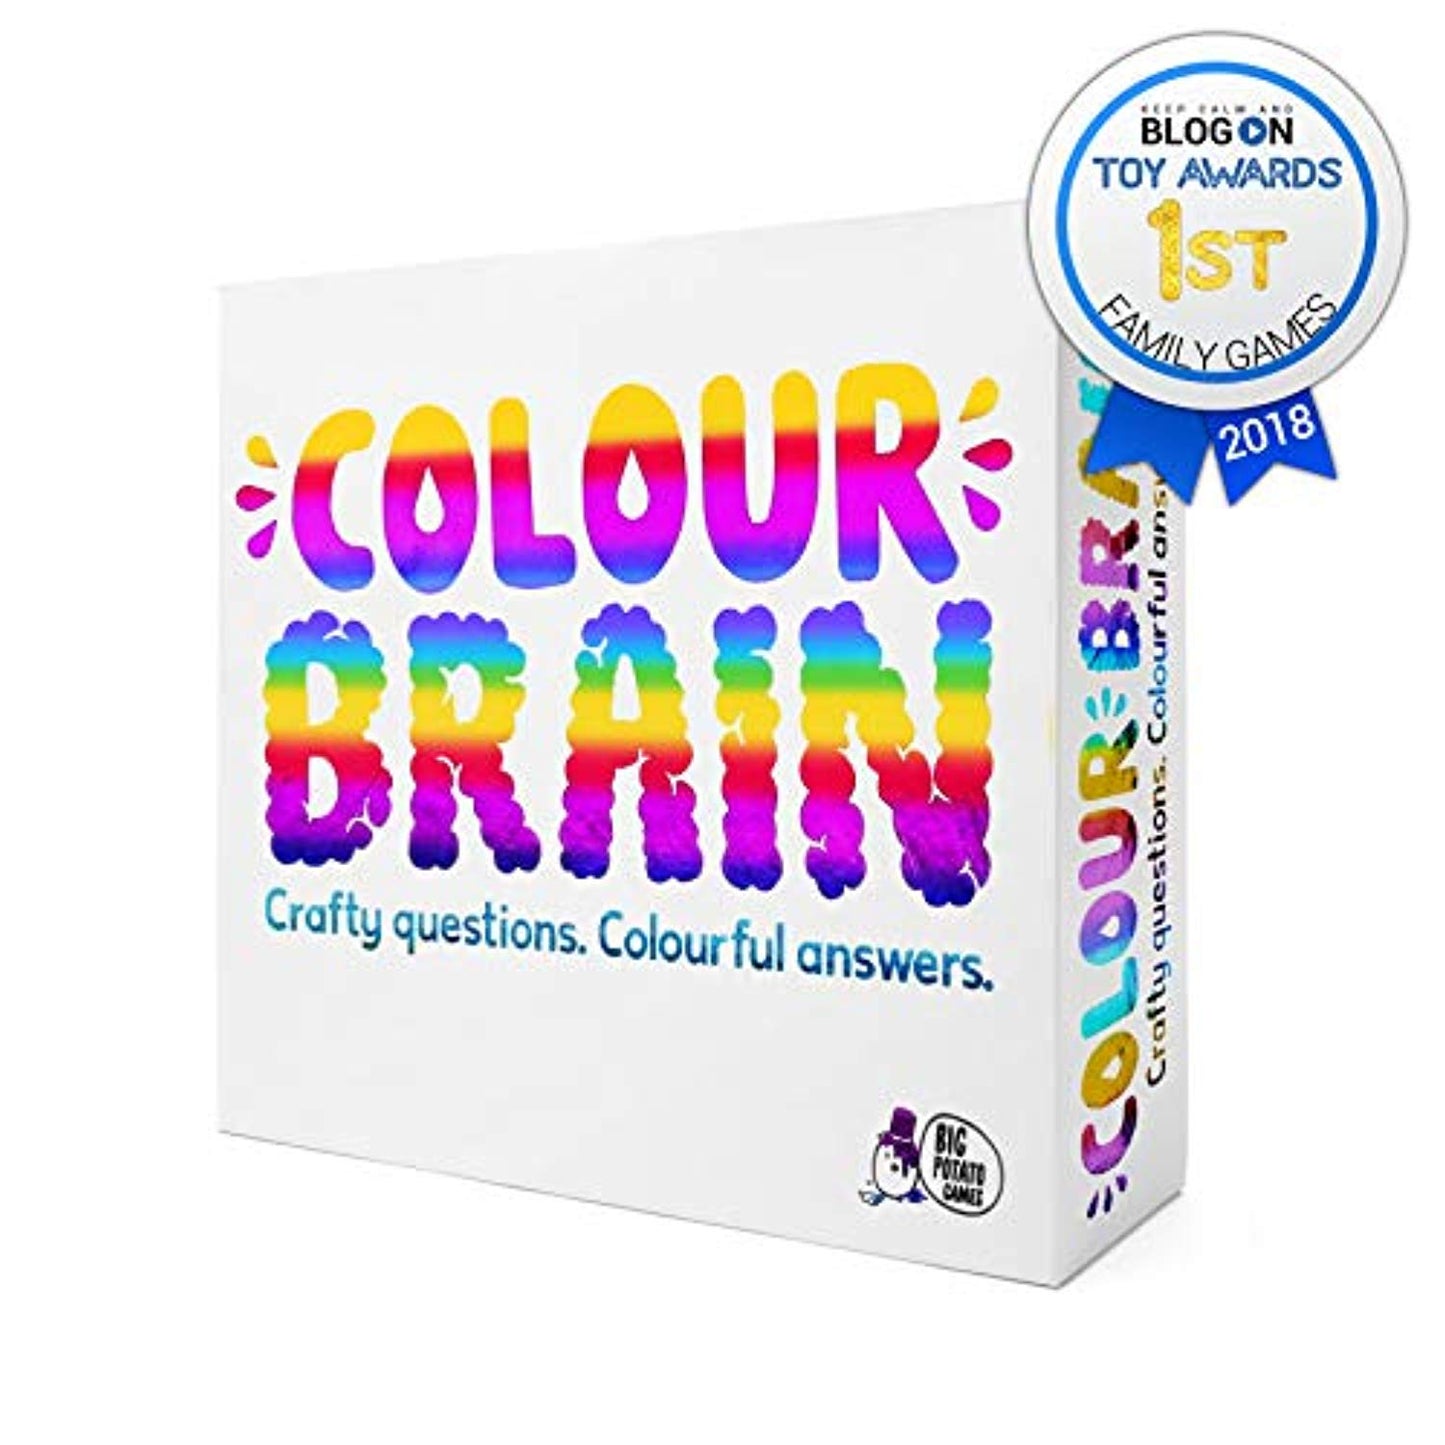 Big Potato Colourbrain: The Ultimate Board Game For Families - Offer Games